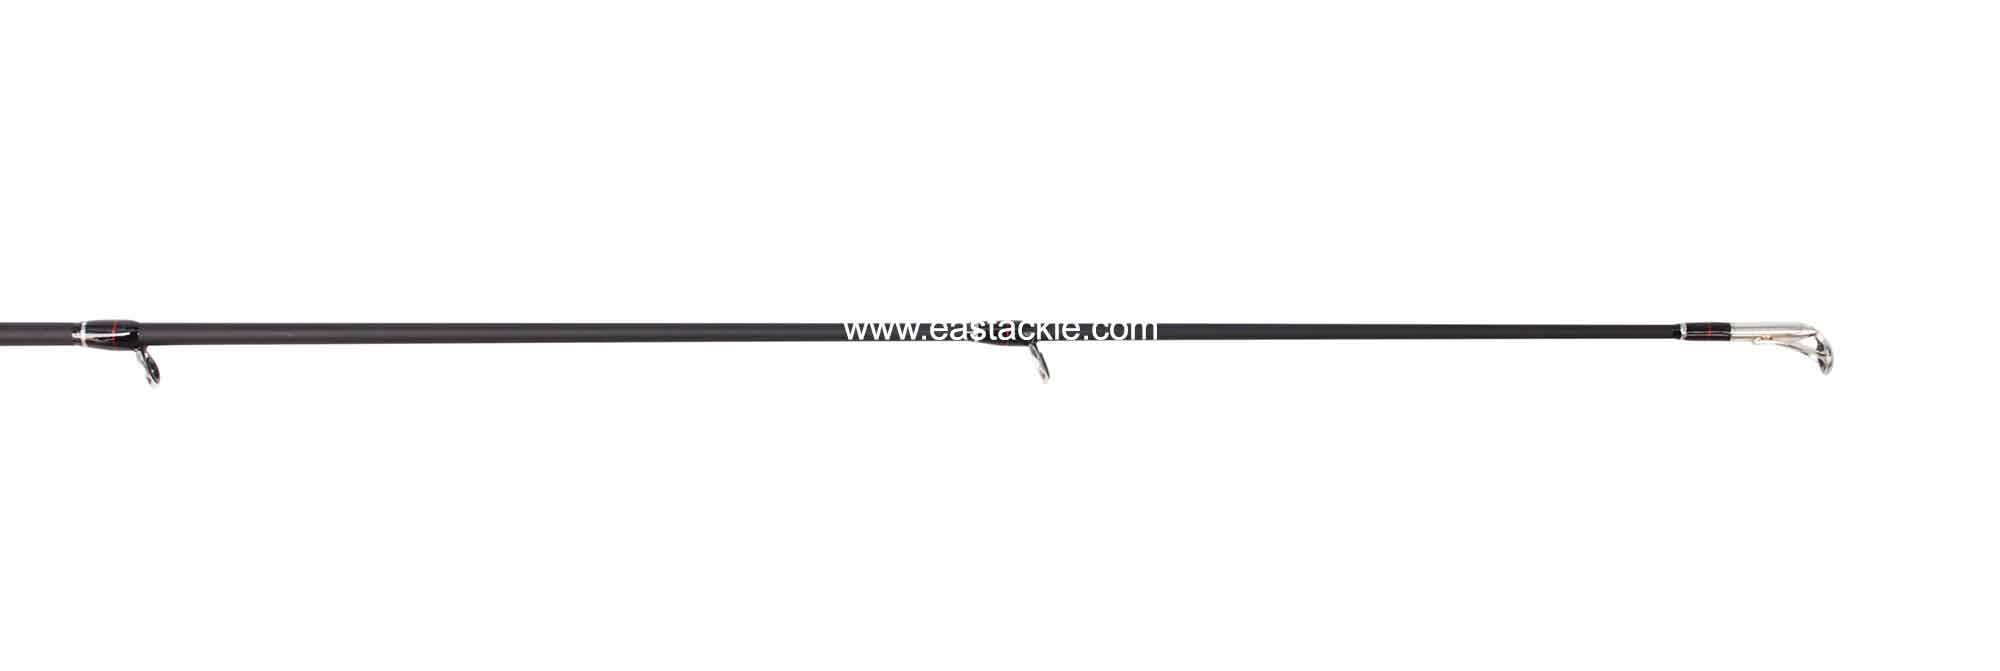 Megabass - Racing Condition World Edition - RCS-782L - Spinning Rod - Tip Section